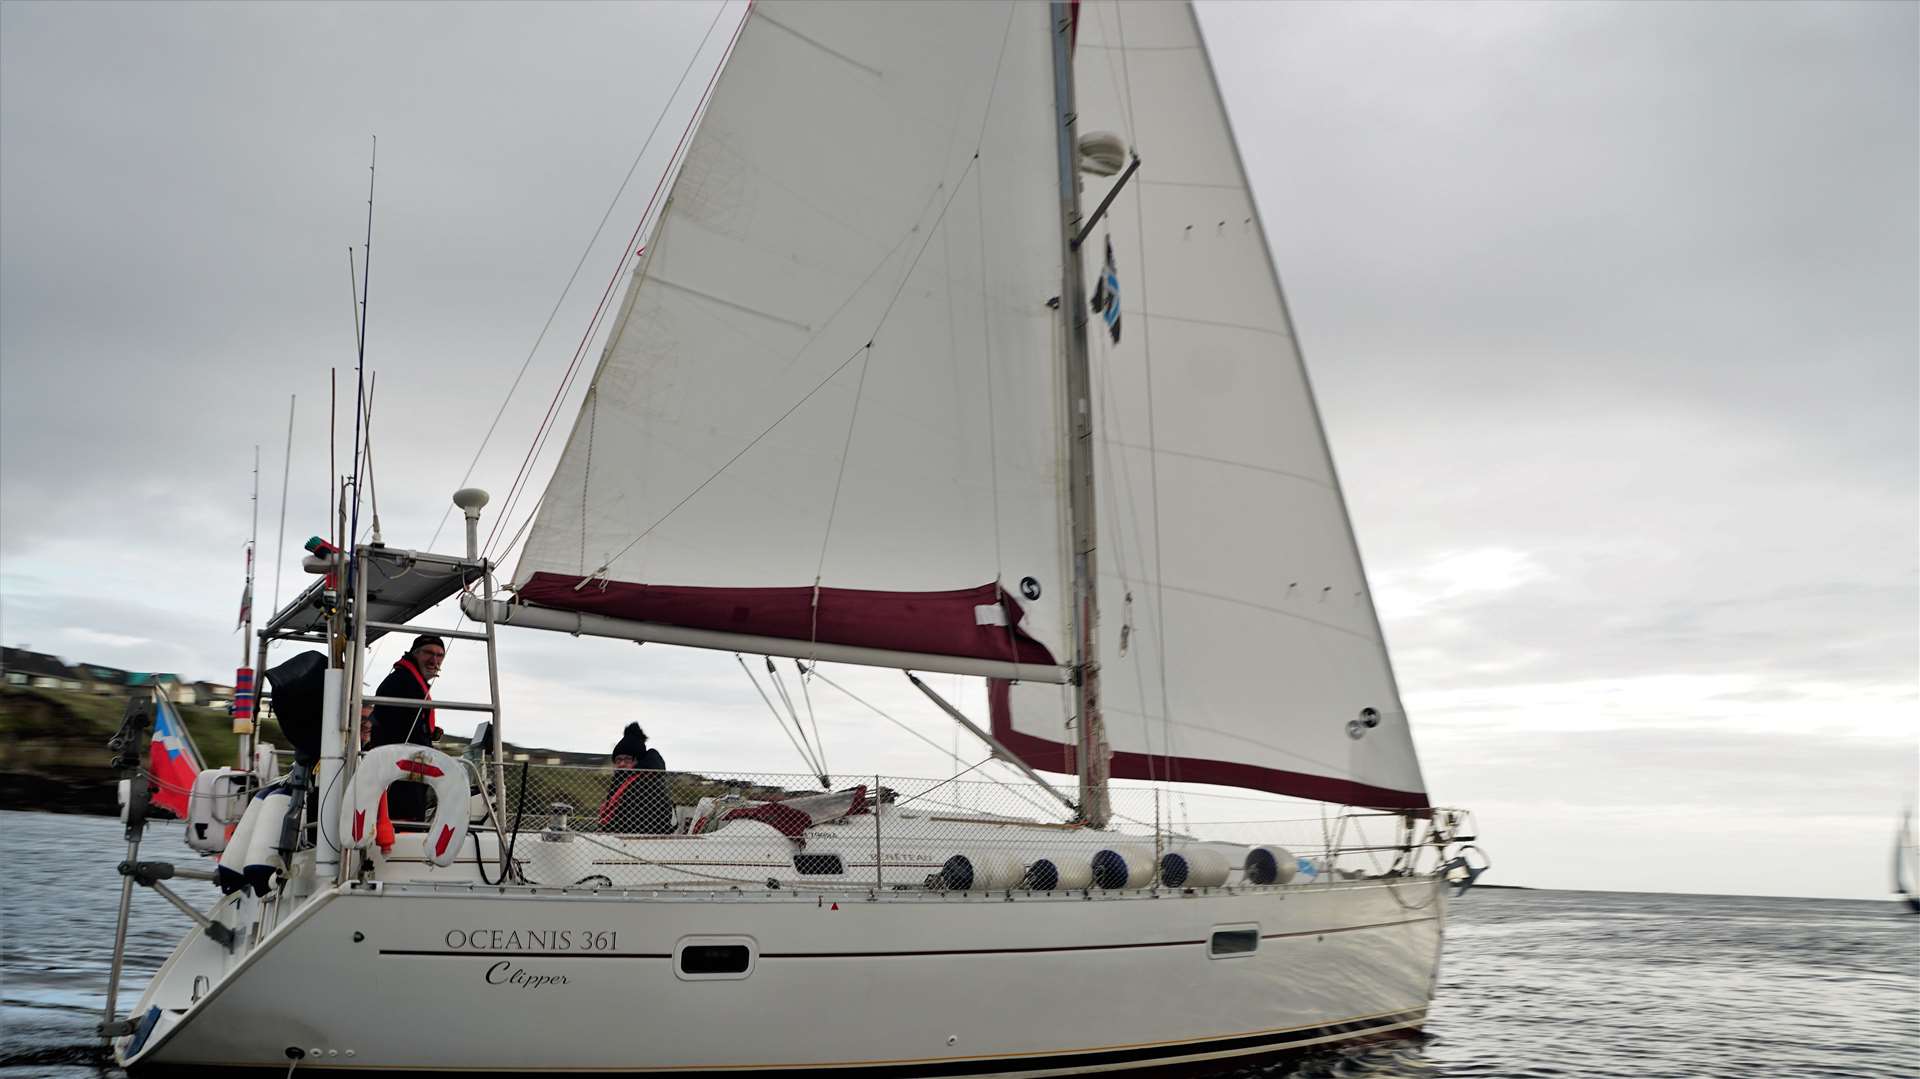 George Durrand, who planned the event, sails CD Venture into the bay. Picture: DGS